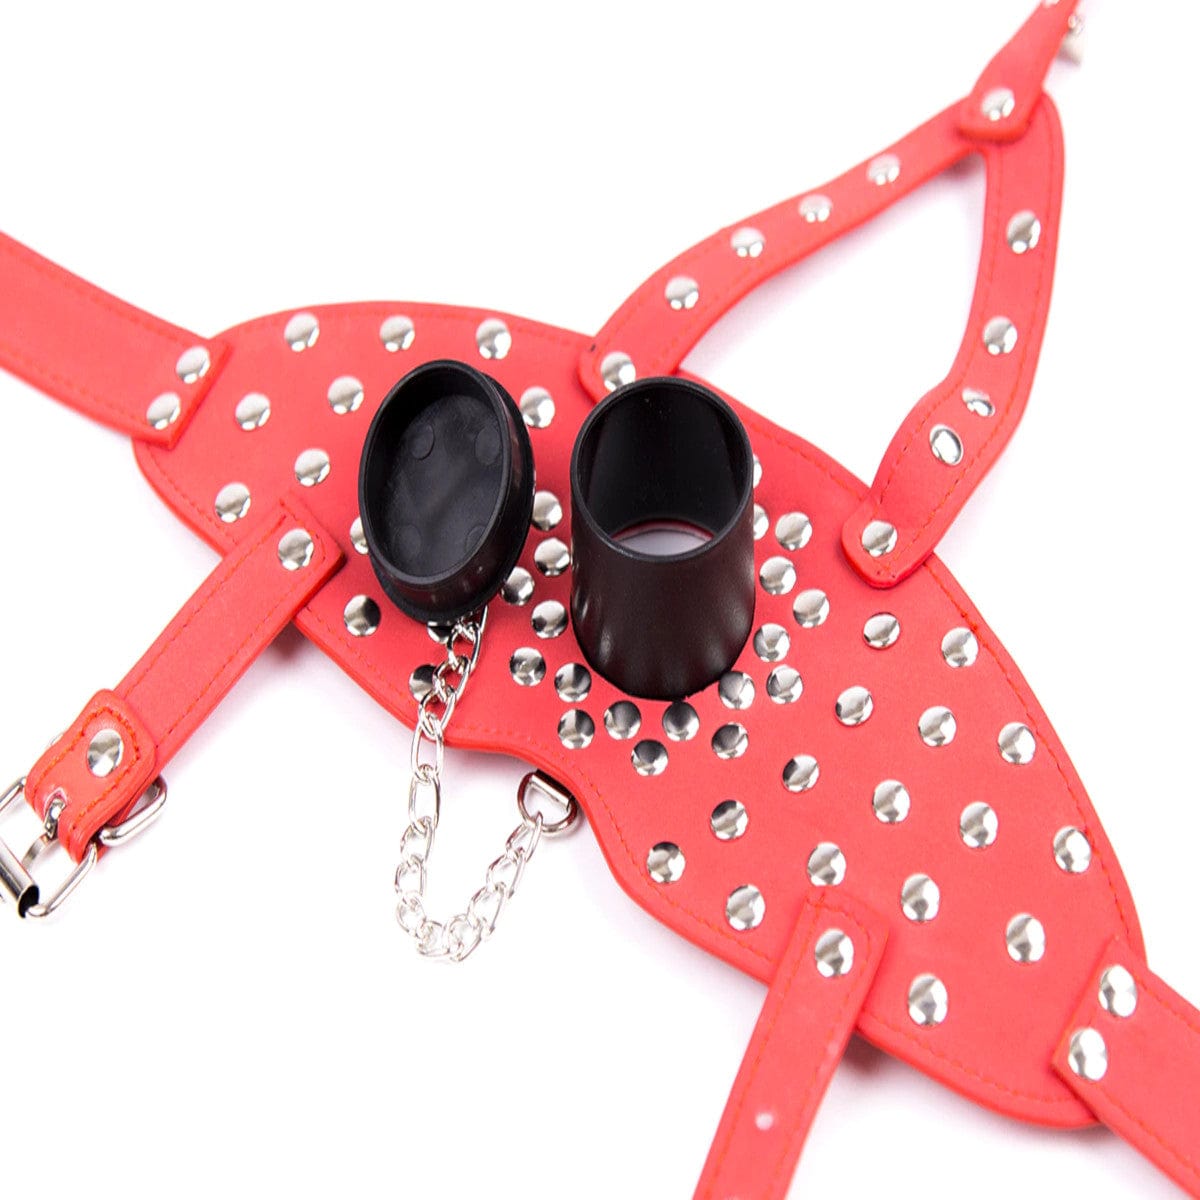 Image of the BDSM Studded Gothic Face Muzzle designed for dominance and submission play.